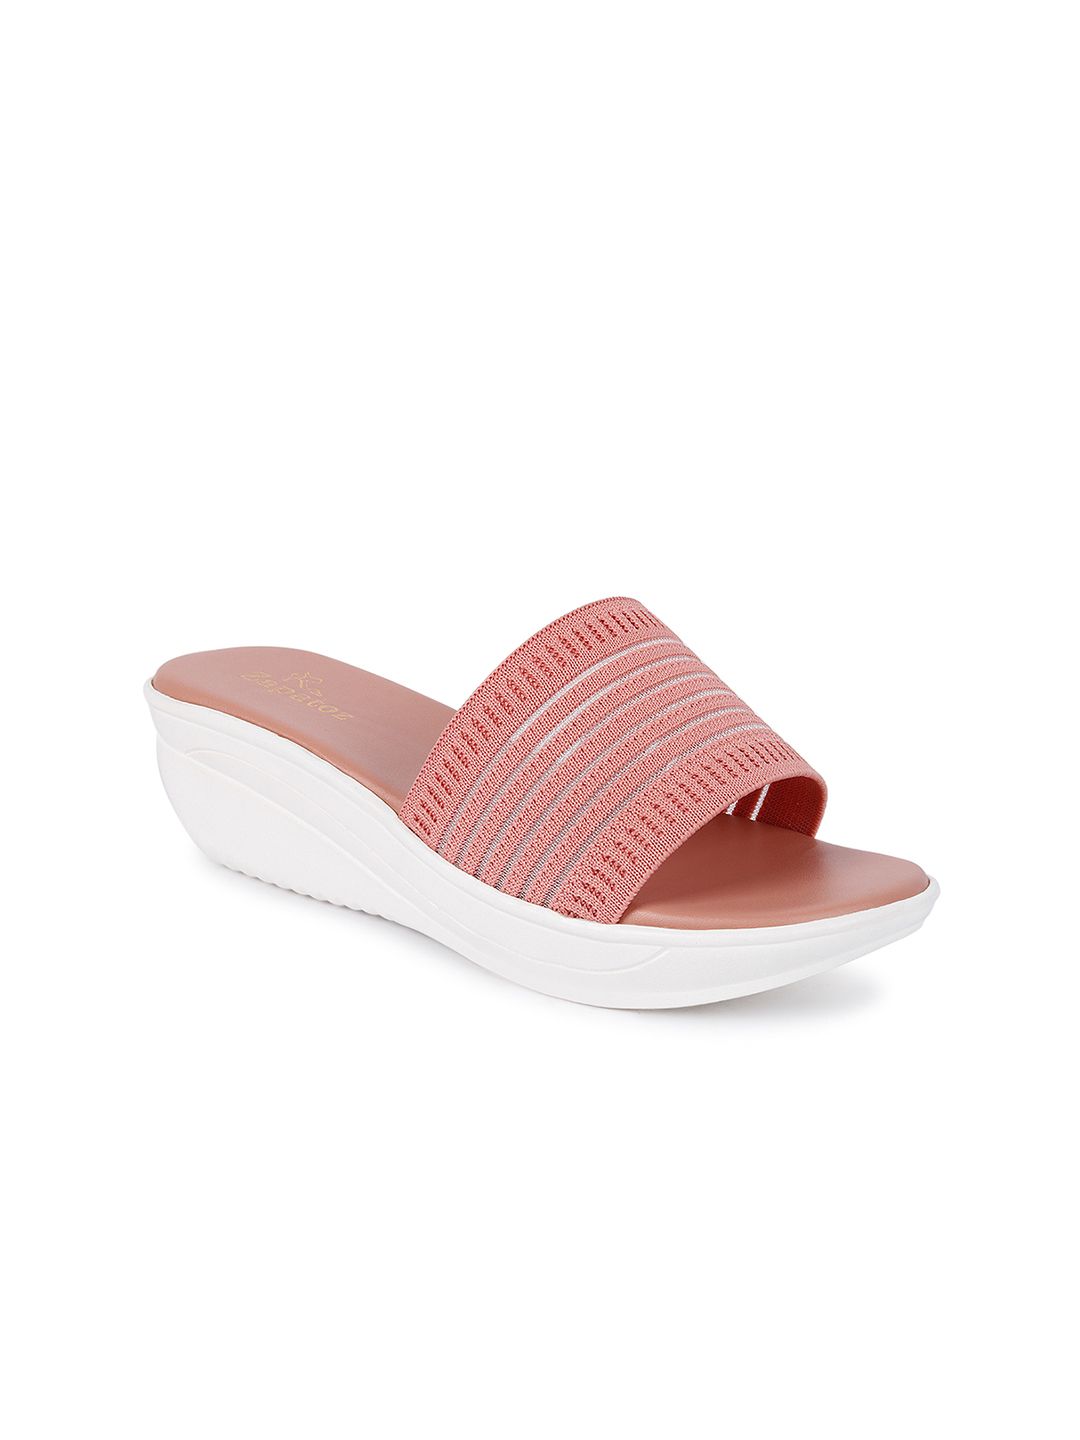 ZAPATOZ Women Pink Woven Design Wedges Price in India